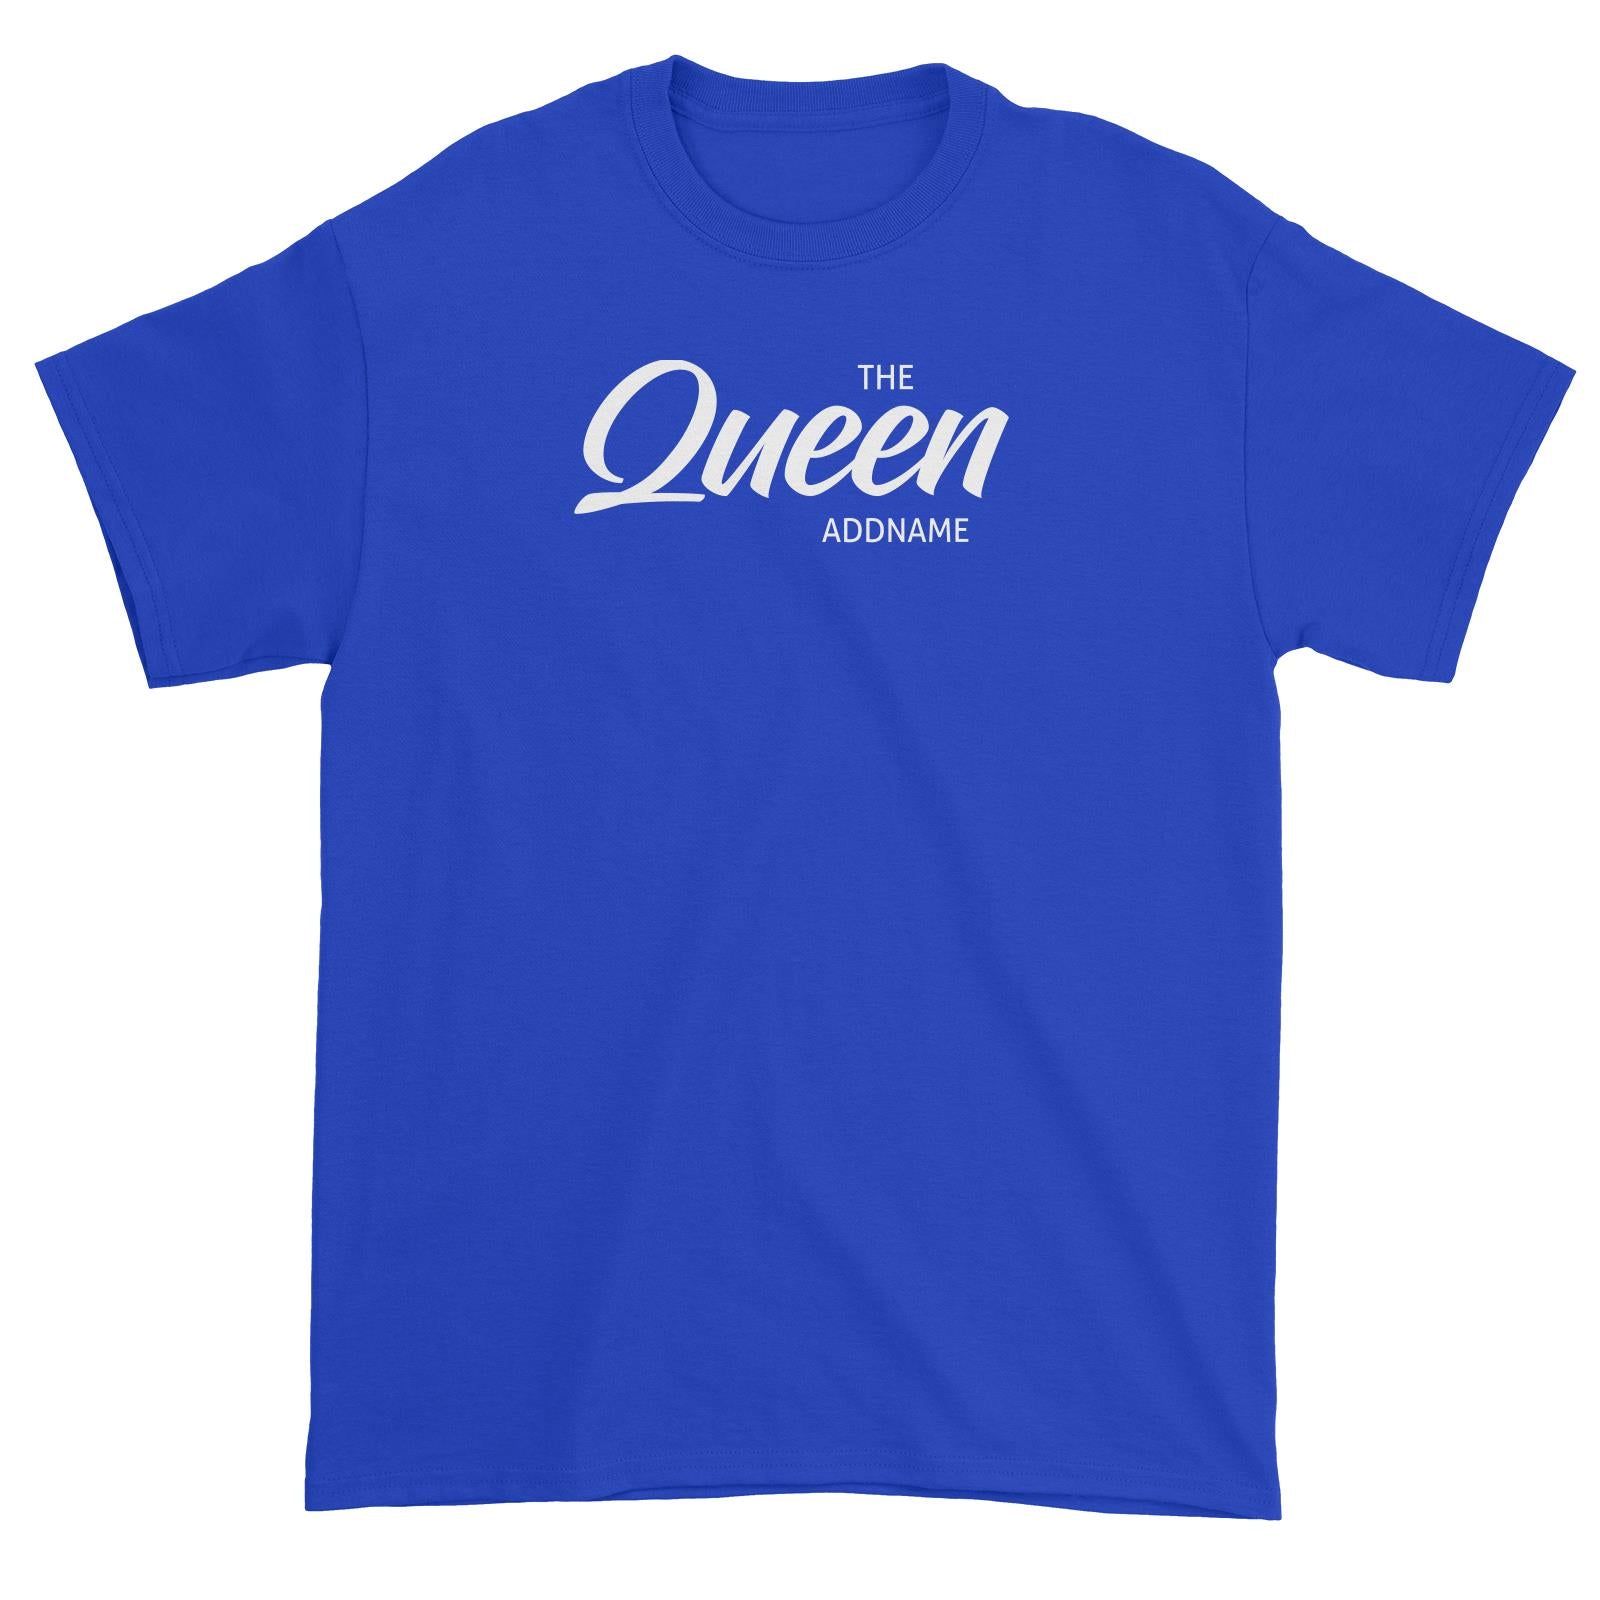 The Queen Addname Unisex T-Shirt Personalizable Designs Matching Family Royal Family Edition Royal Simple